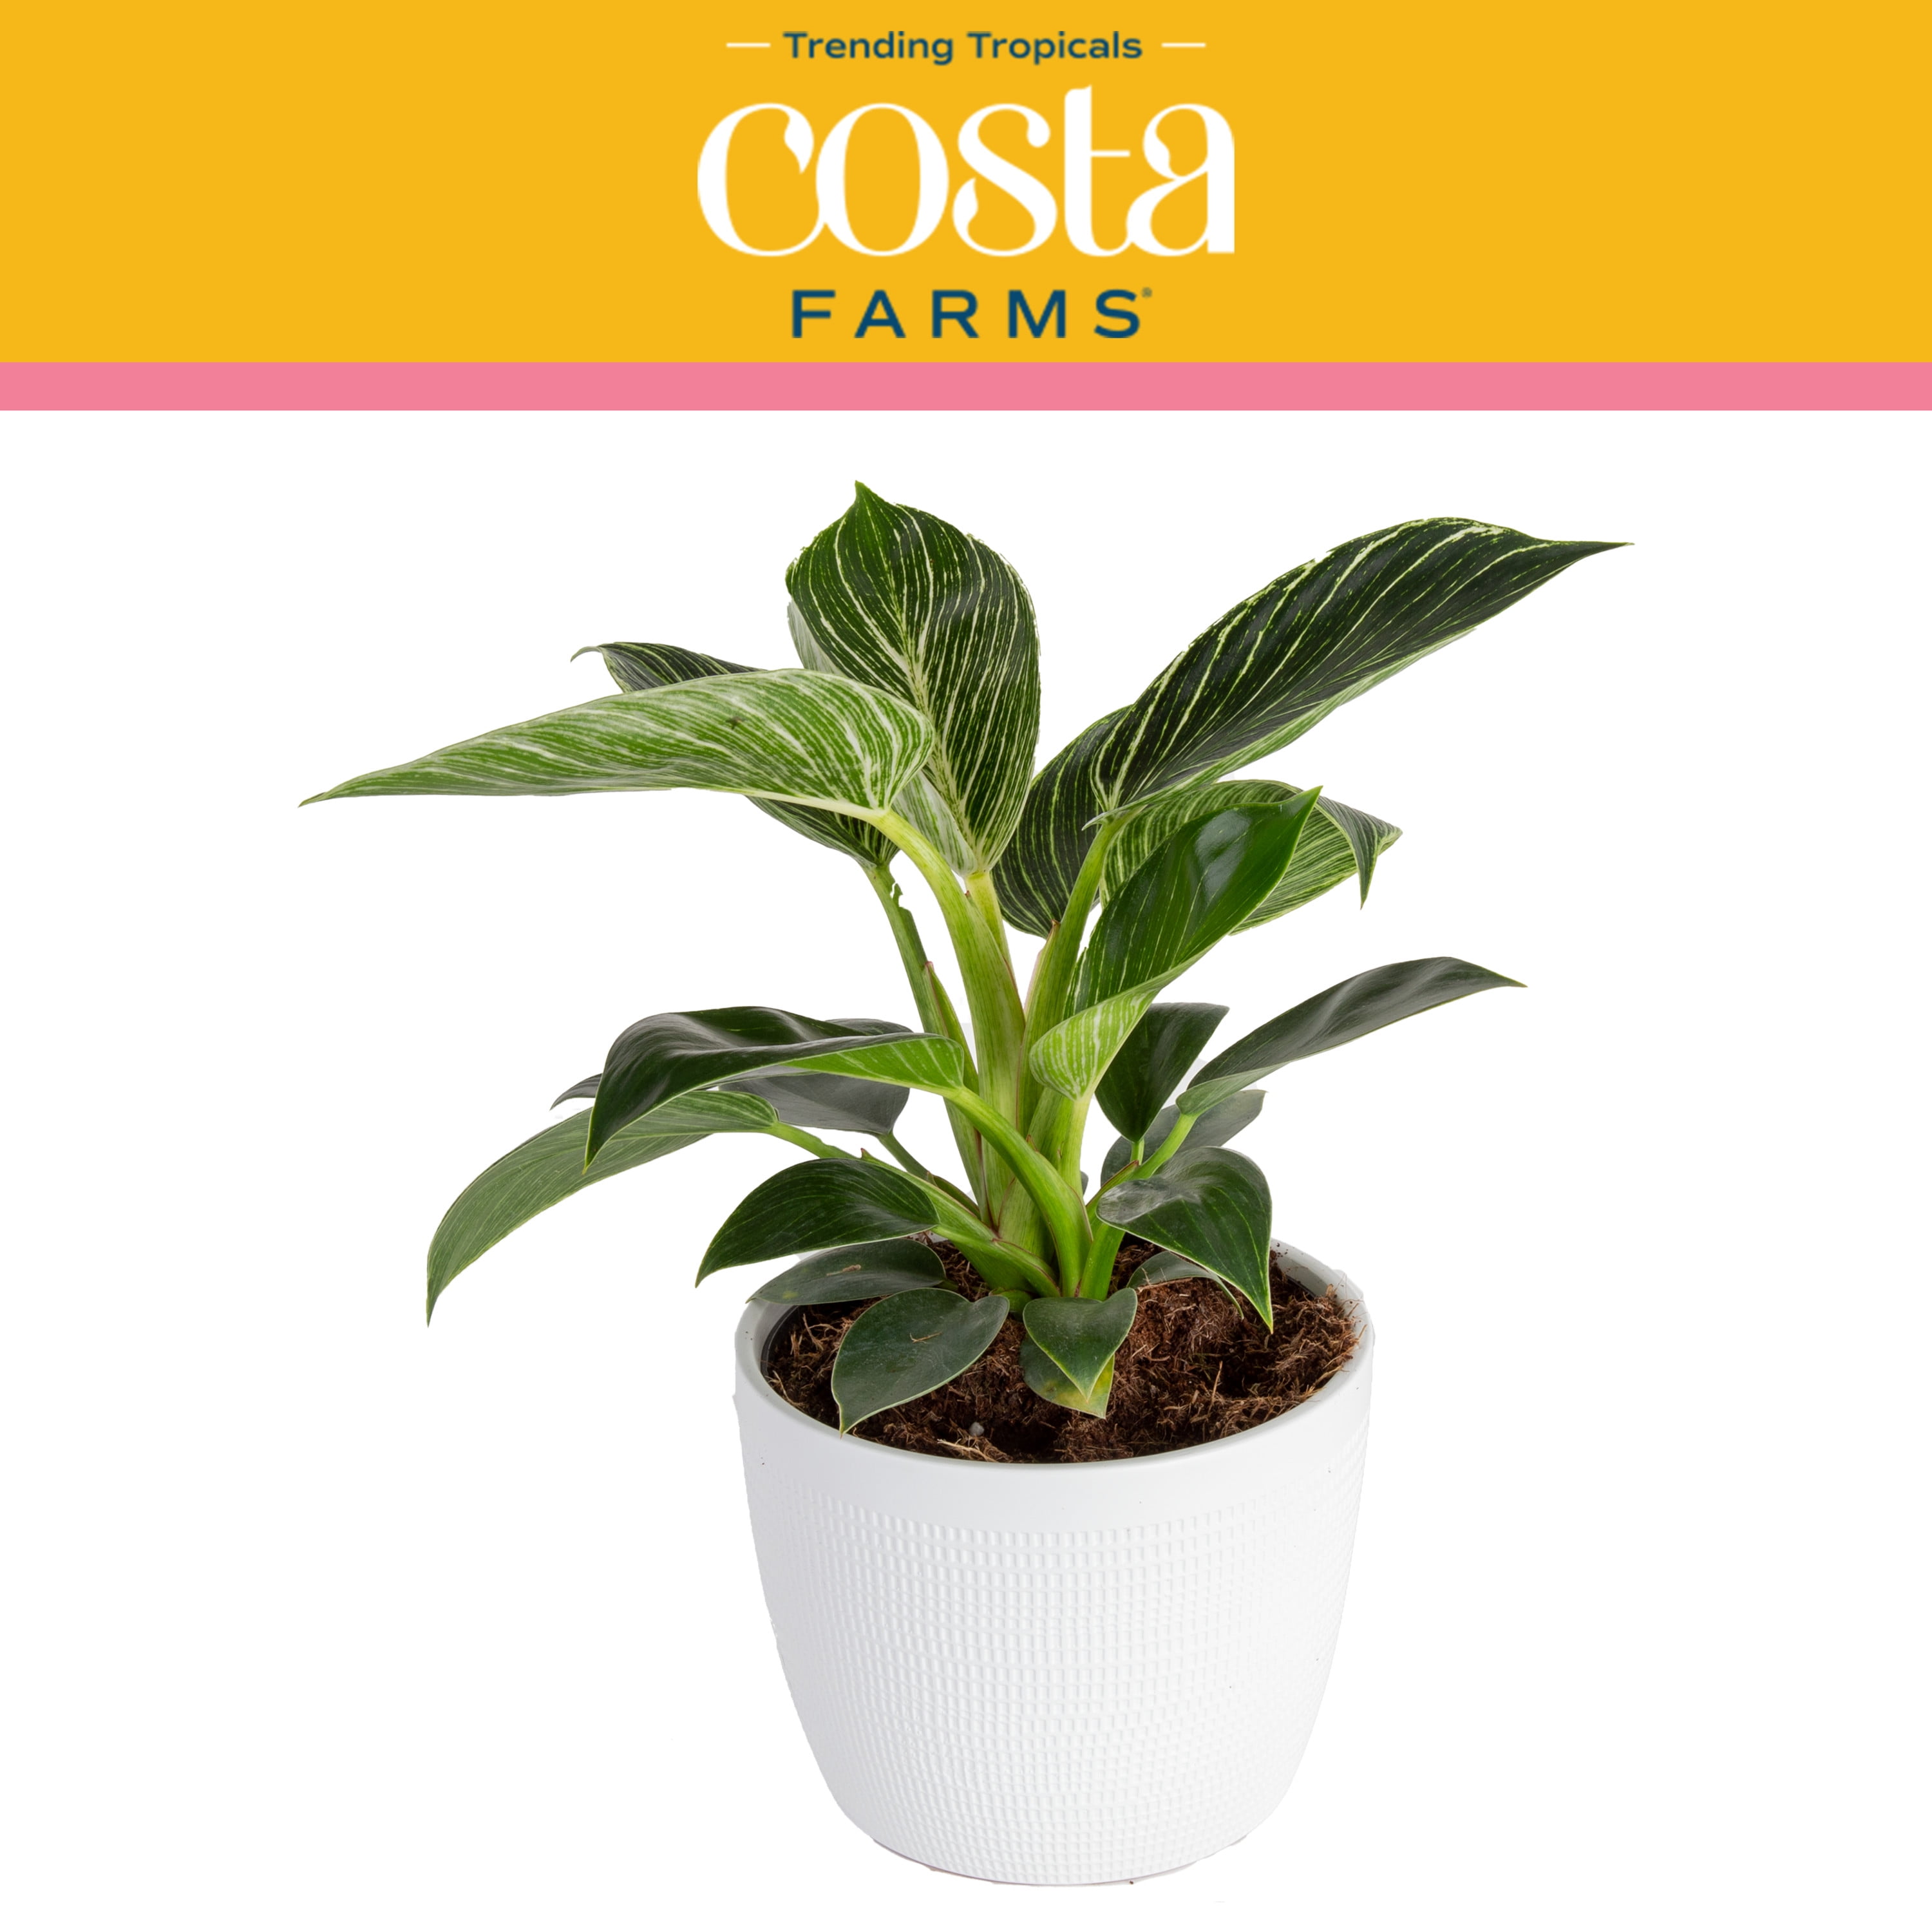 Costa Farms Trending Tropicals Live Indoor 15in Tall Green Xanthosoma Bright Indirect